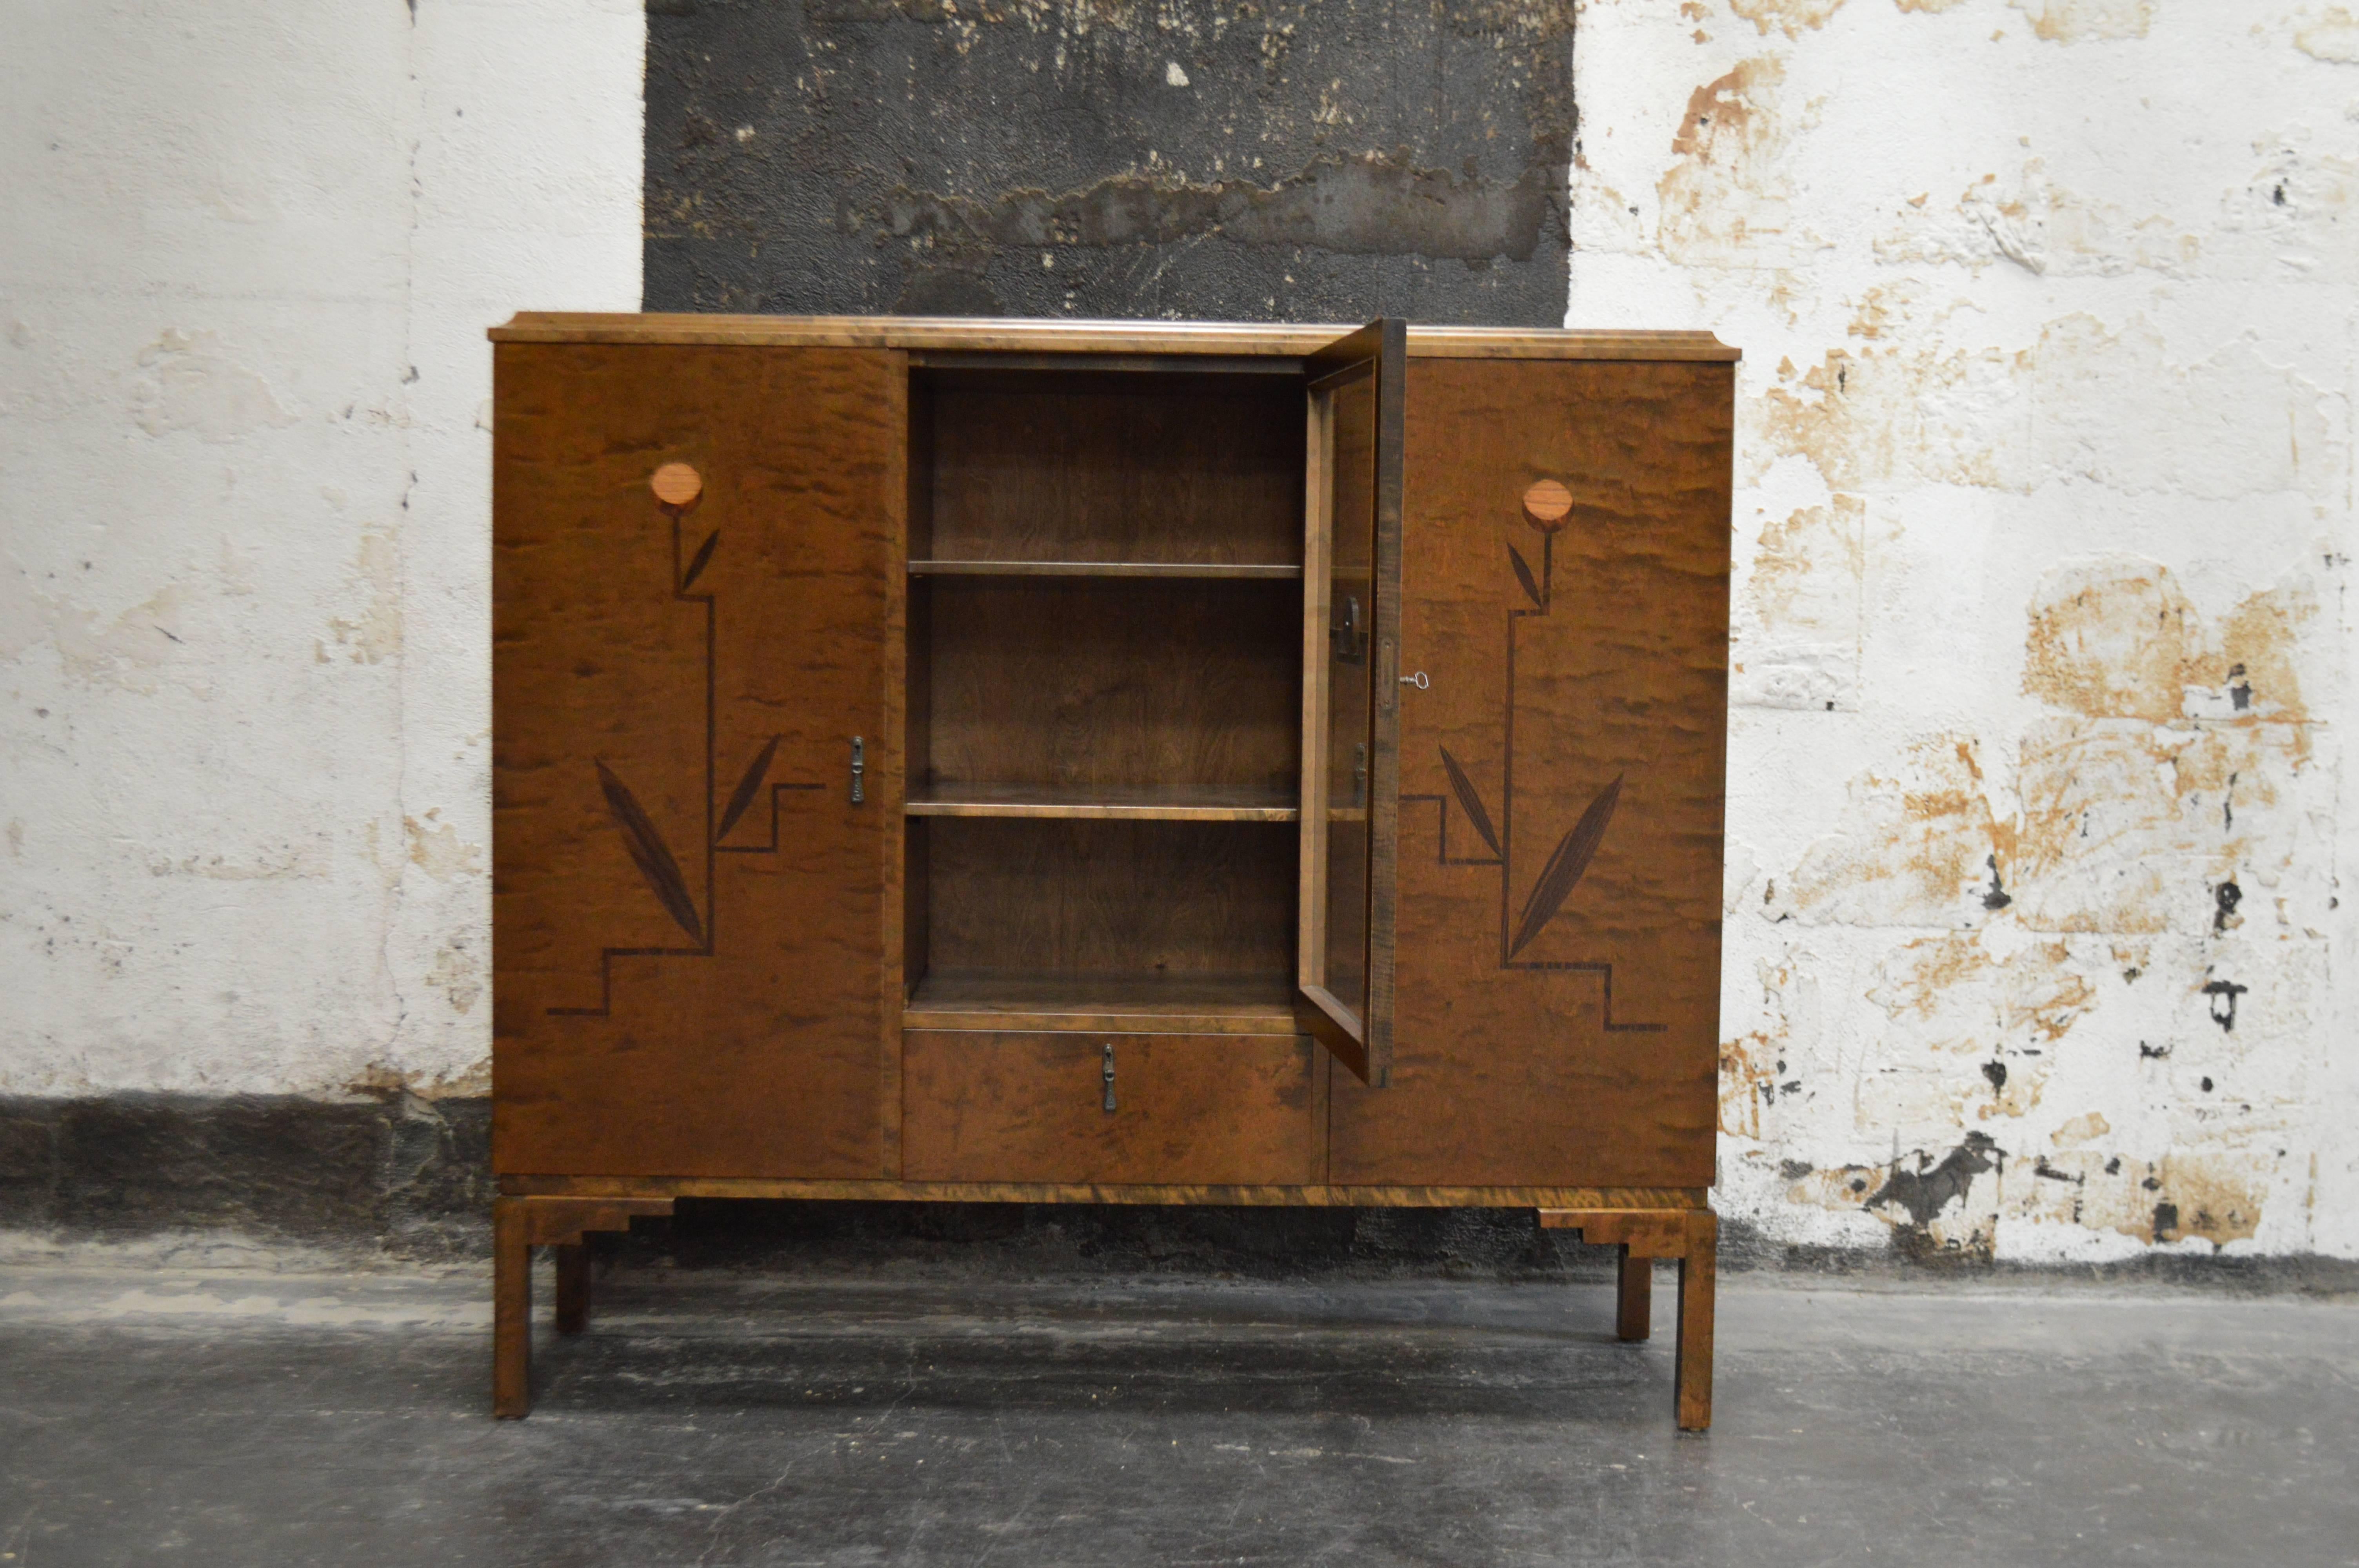 Swedish inlaid Art Deco or neoclassical bookcase or storage cabinet, Sweden, circa 1930s. Exterior dark flame birch. The front two side doors are paneled and inlaid with intarsia of ebonized birch, mahogany, elm and jacaranda wood. The center door